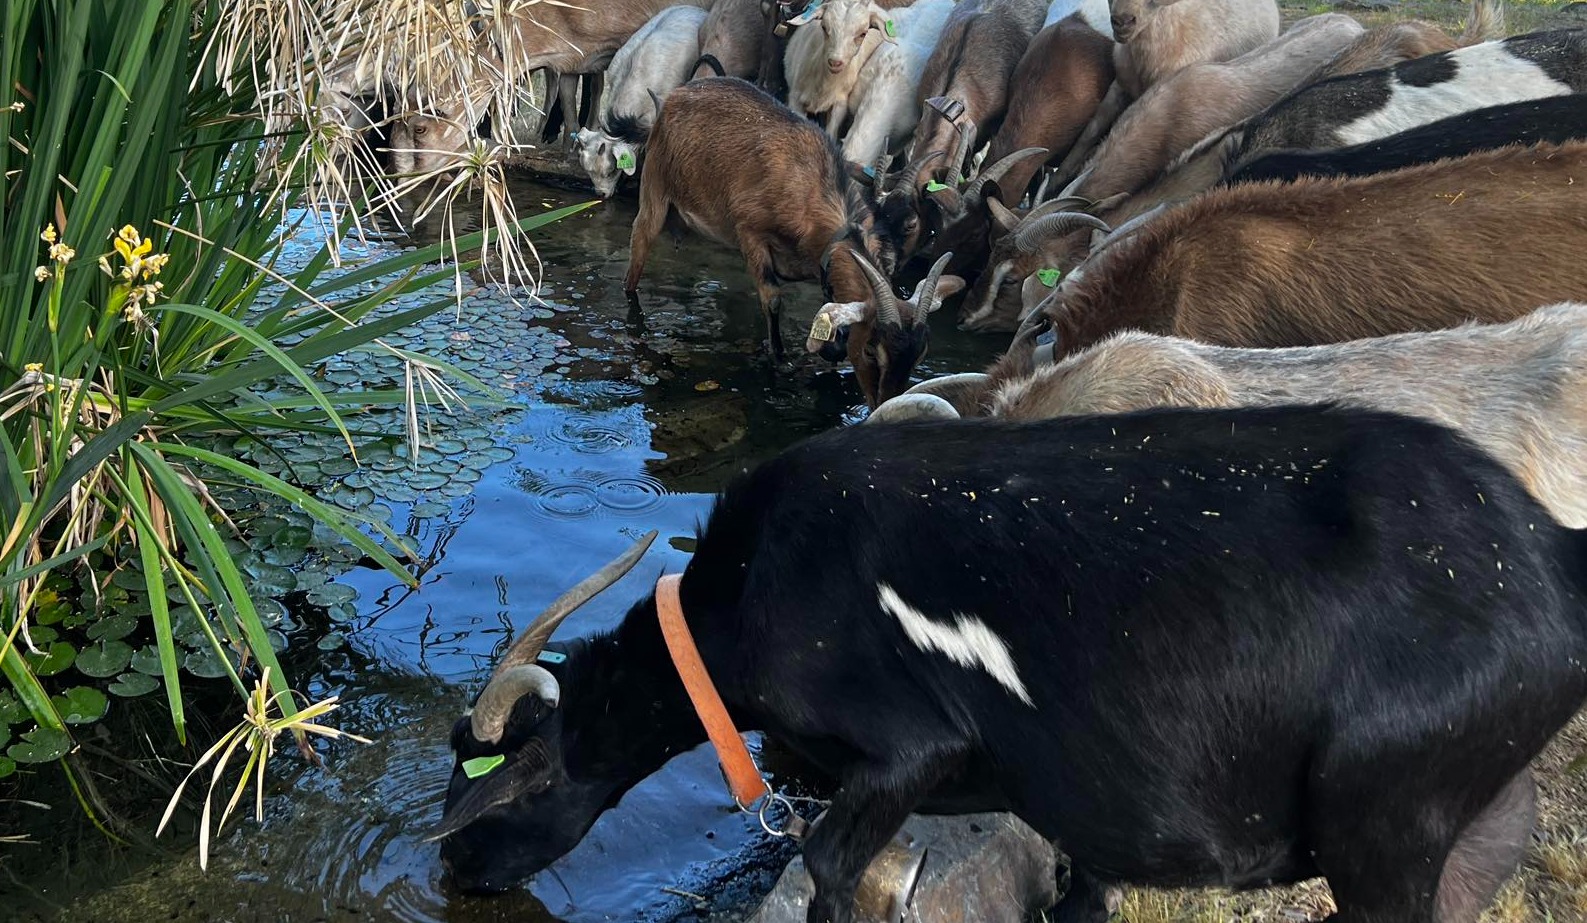 The herd drinkingn. Uploaded by Rocking AR Goats